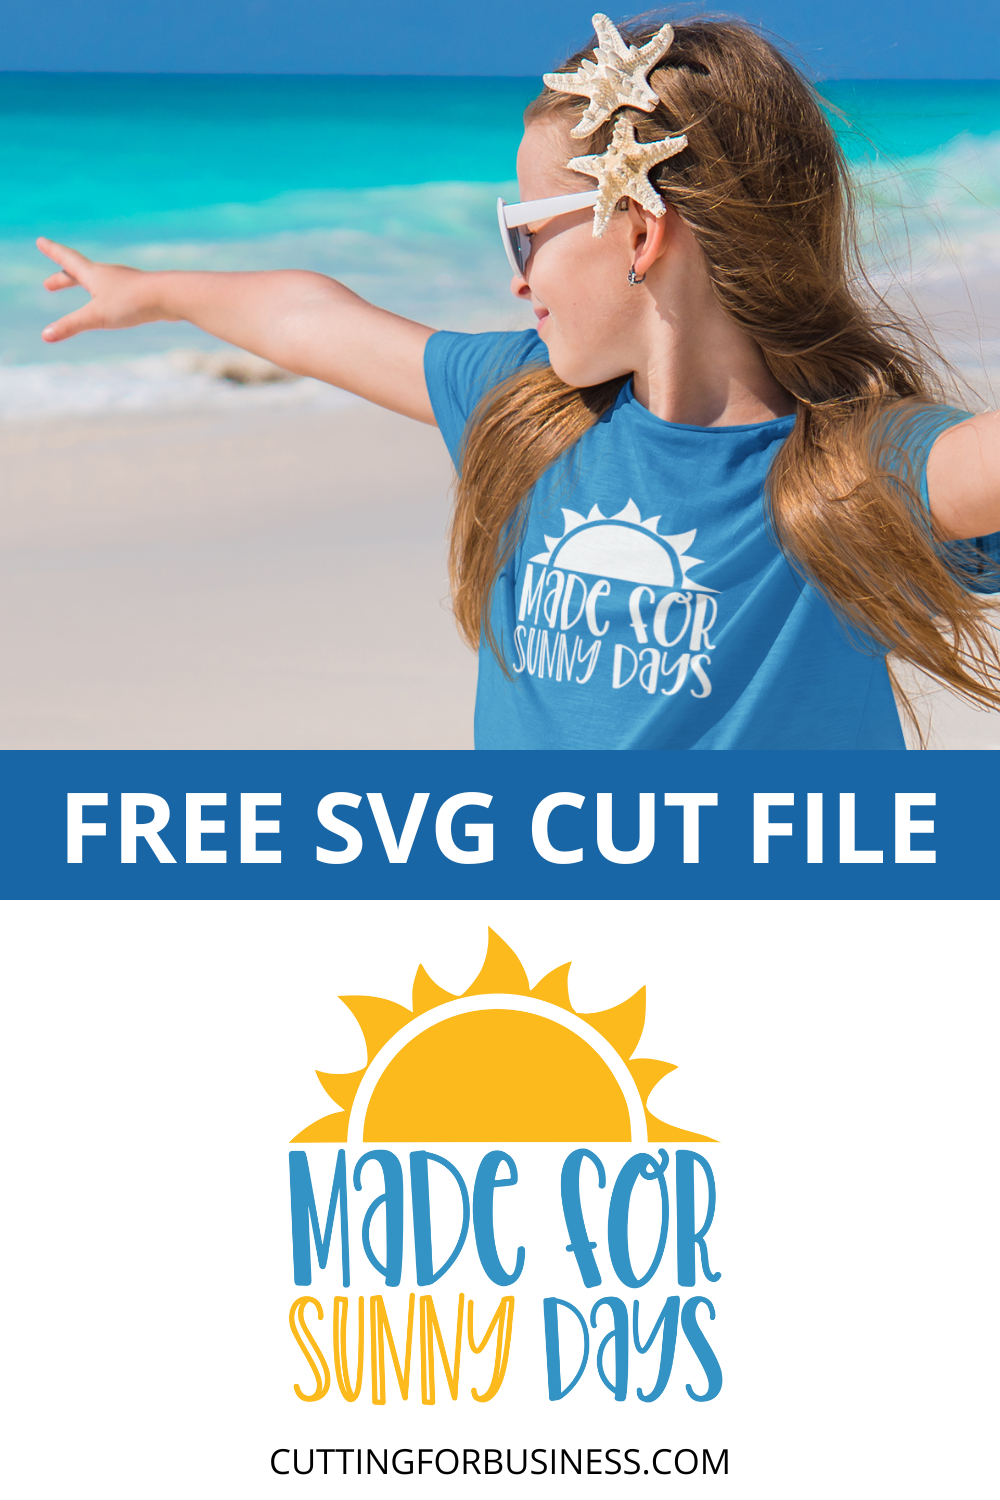 Free 'Made for Sunny Days' SVG cut file for Silhouette, Cricut, Glowforge, and more - cuttingforbusiness.com.